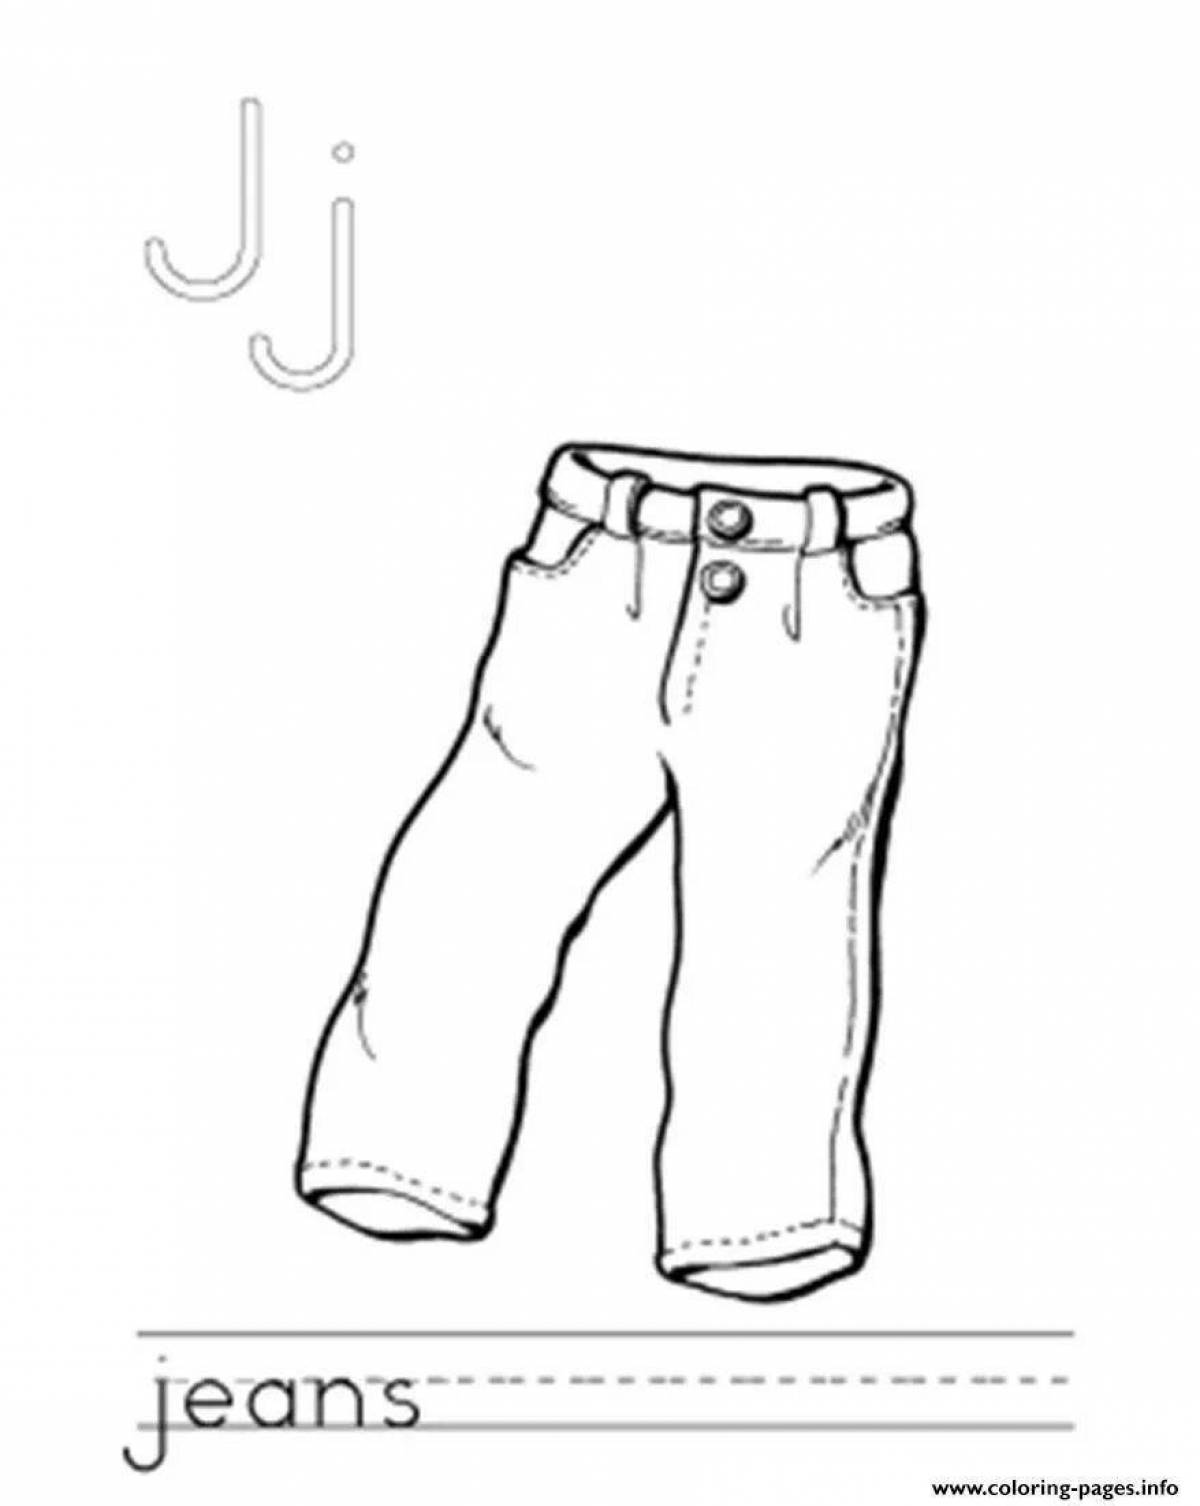 Adorable pants coloring page for kids